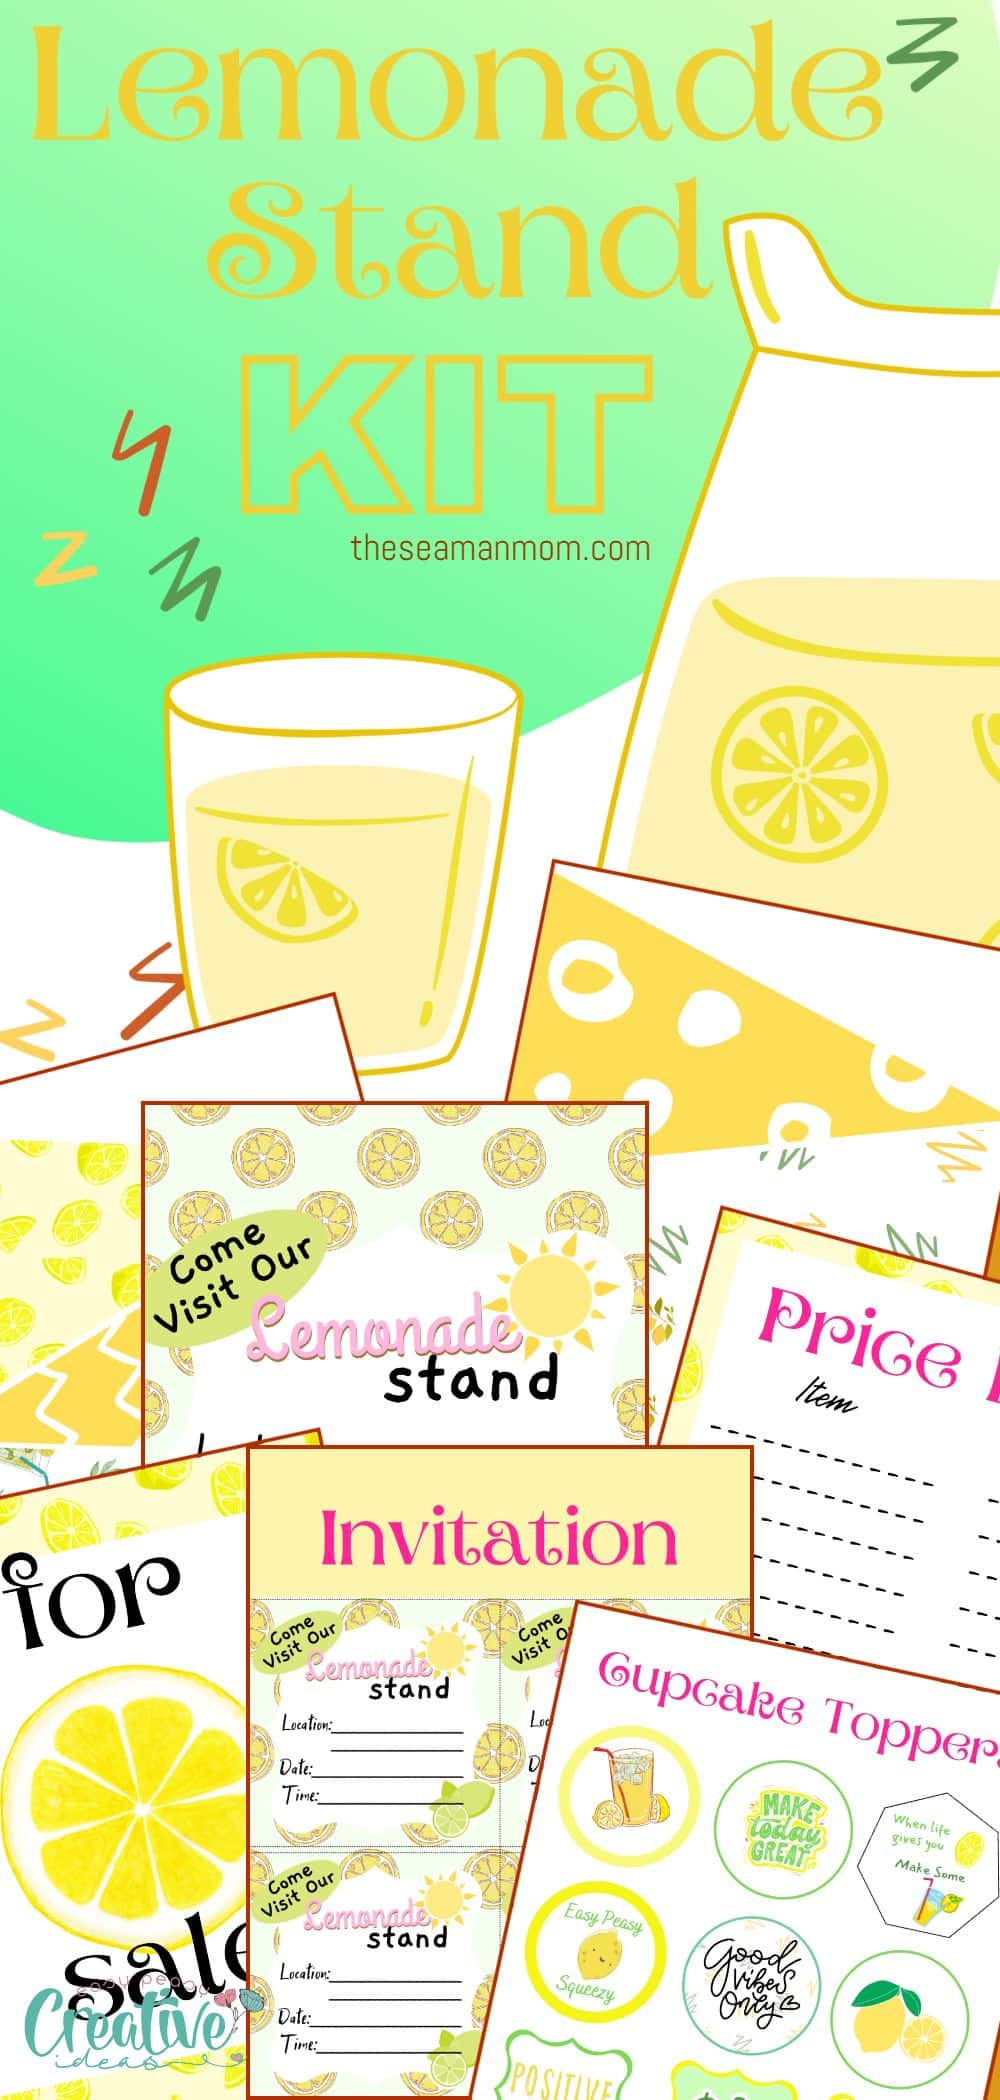 Welcome to the ultimate kit of lemonade stand signs! Whether you are looking for a cute and quirky sign to adorn your lemonade stand or a professional-looking printable sign, you've come to the right place. My collection of lemonade stand signs is sure to give your business that extra bit of flair it needs.  via @petroneagu